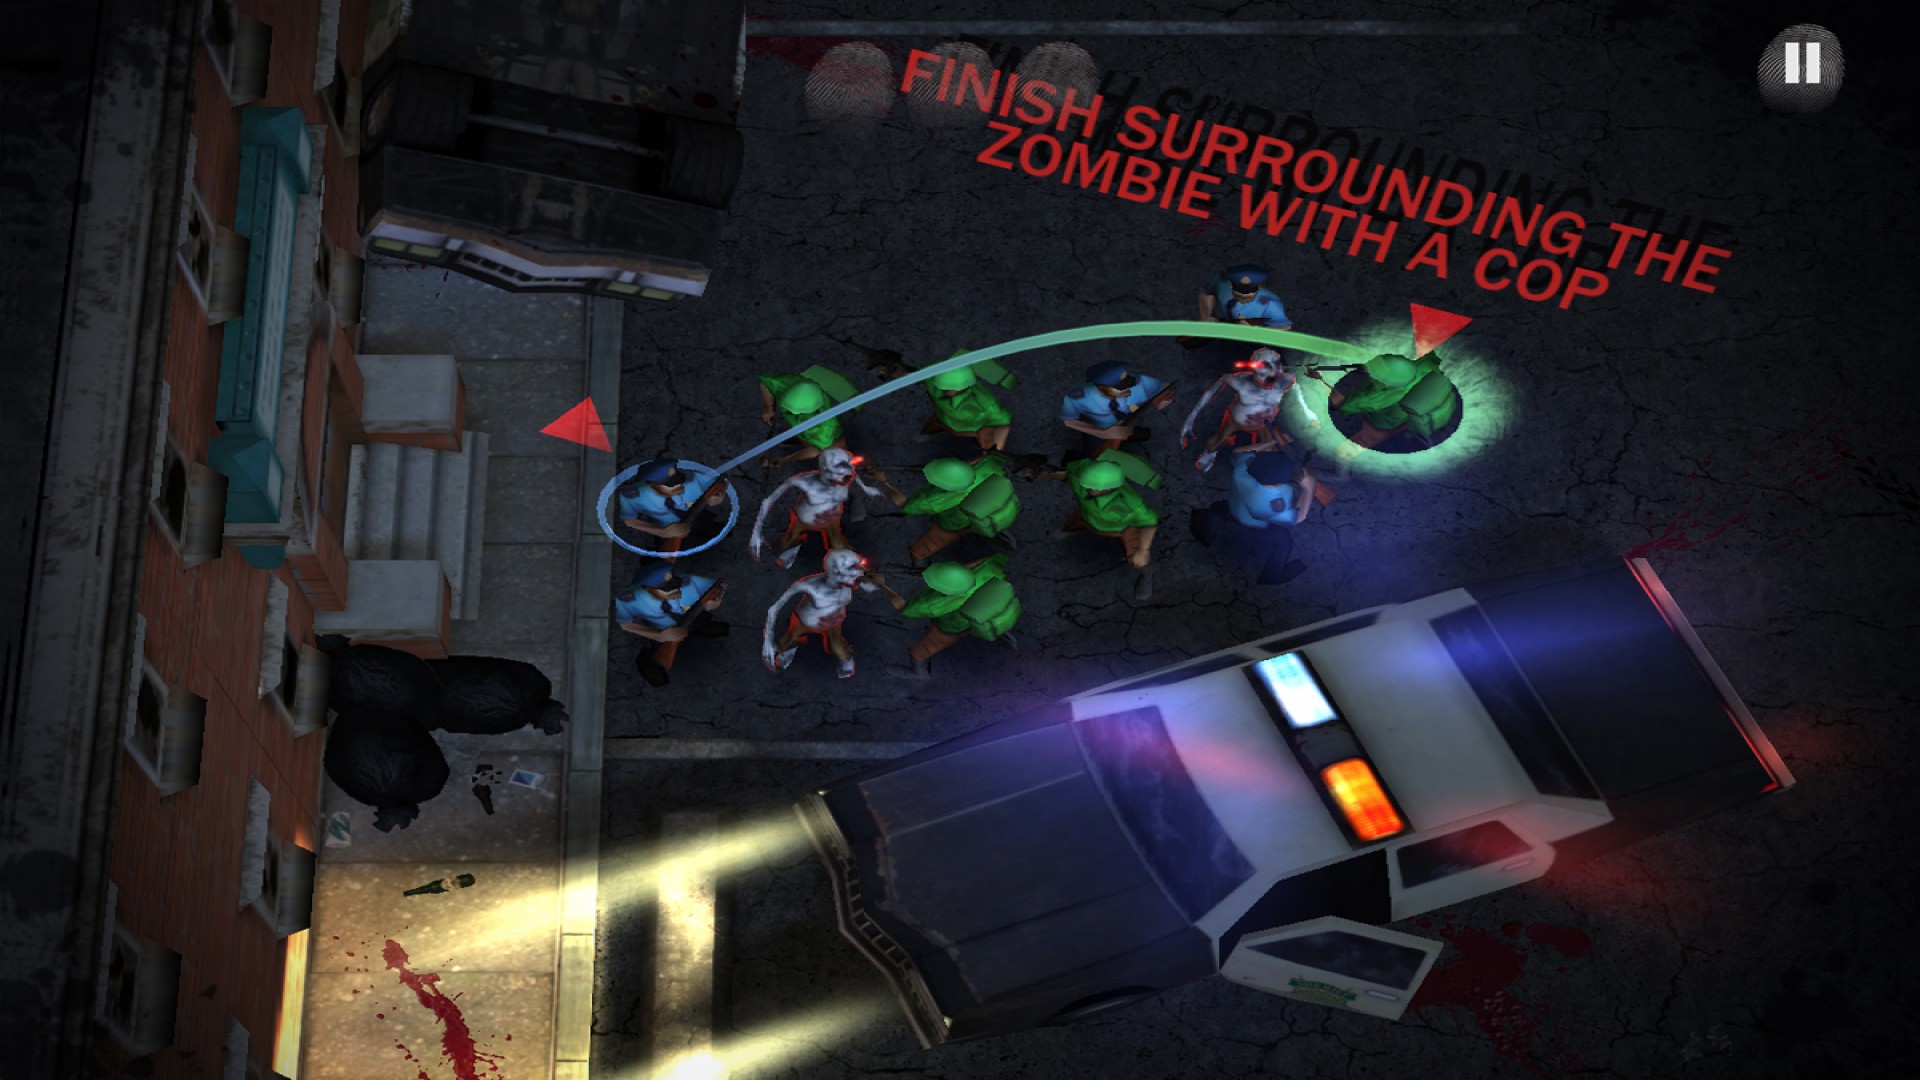 Containment: The Zombie Puzzler screenshot